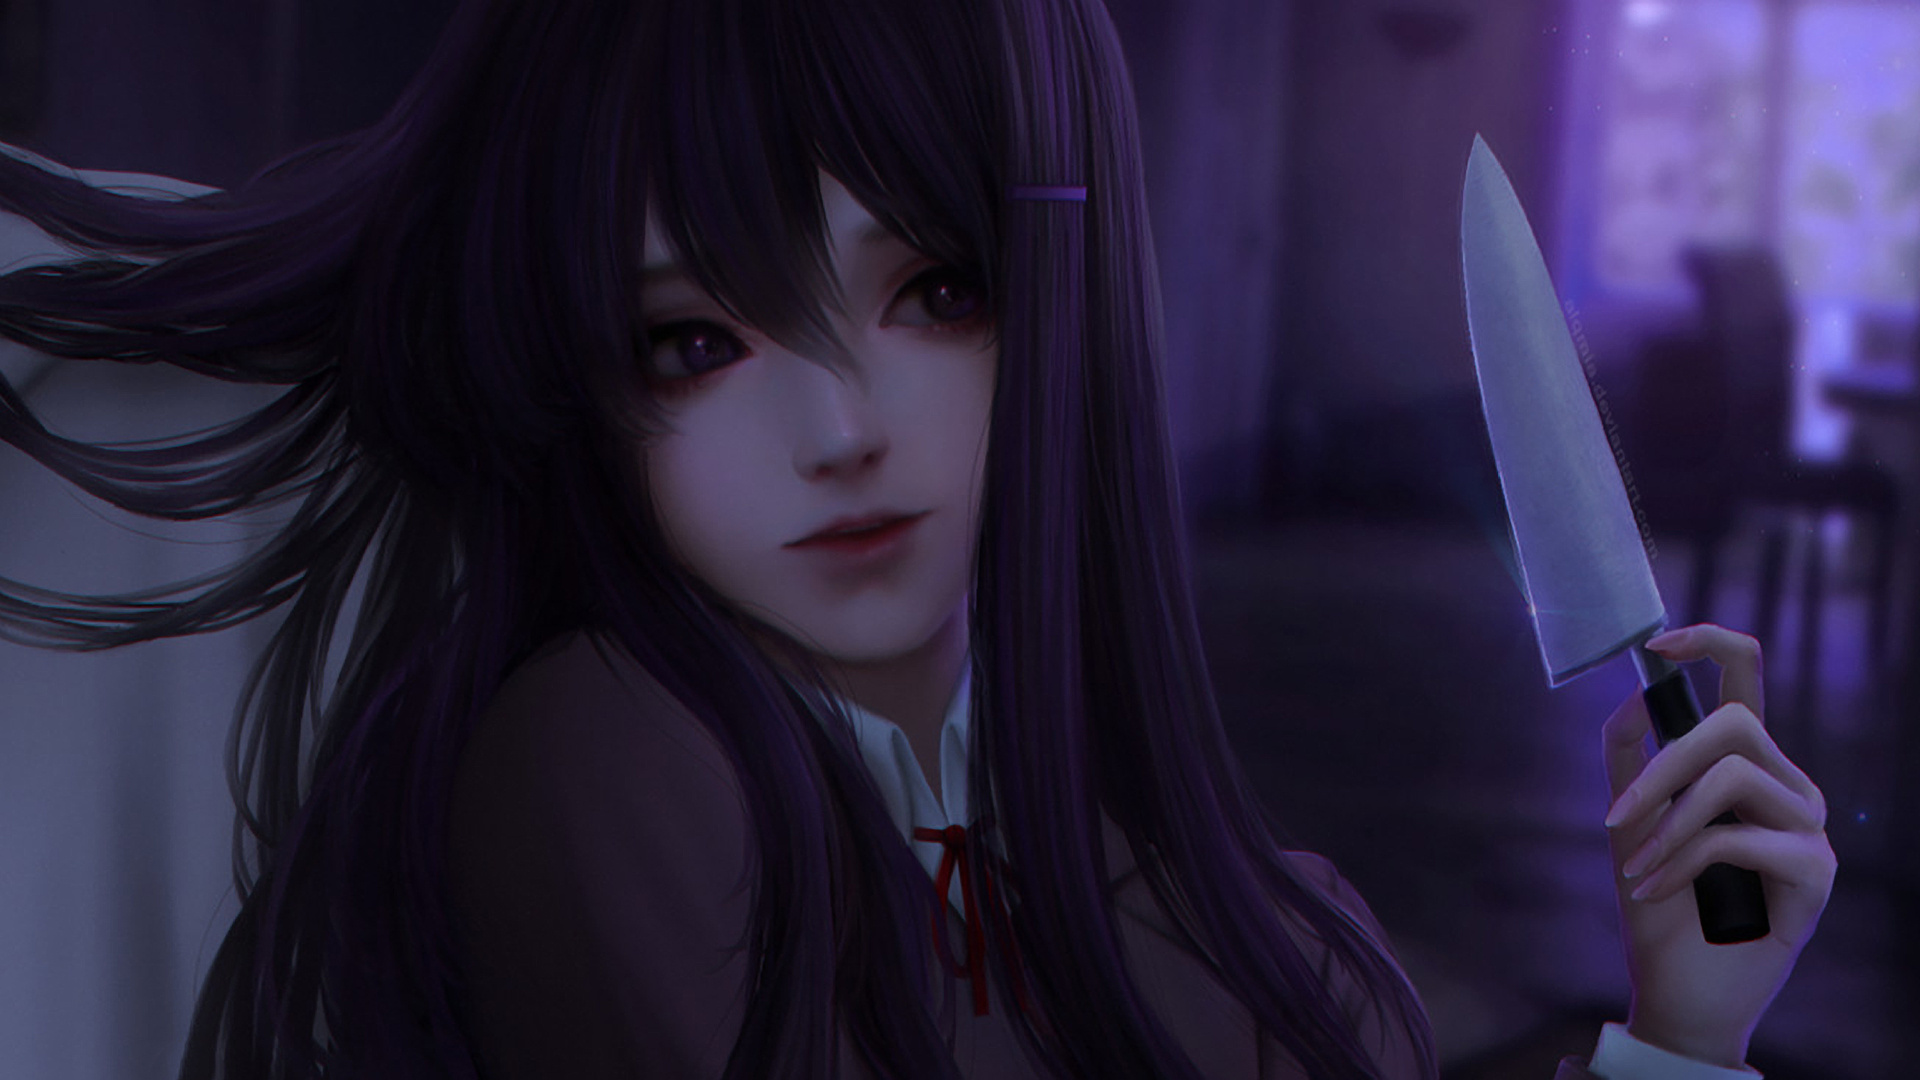 Purple Haired Woman Anime Character. Wallpaper in 1920x1080 Resolution